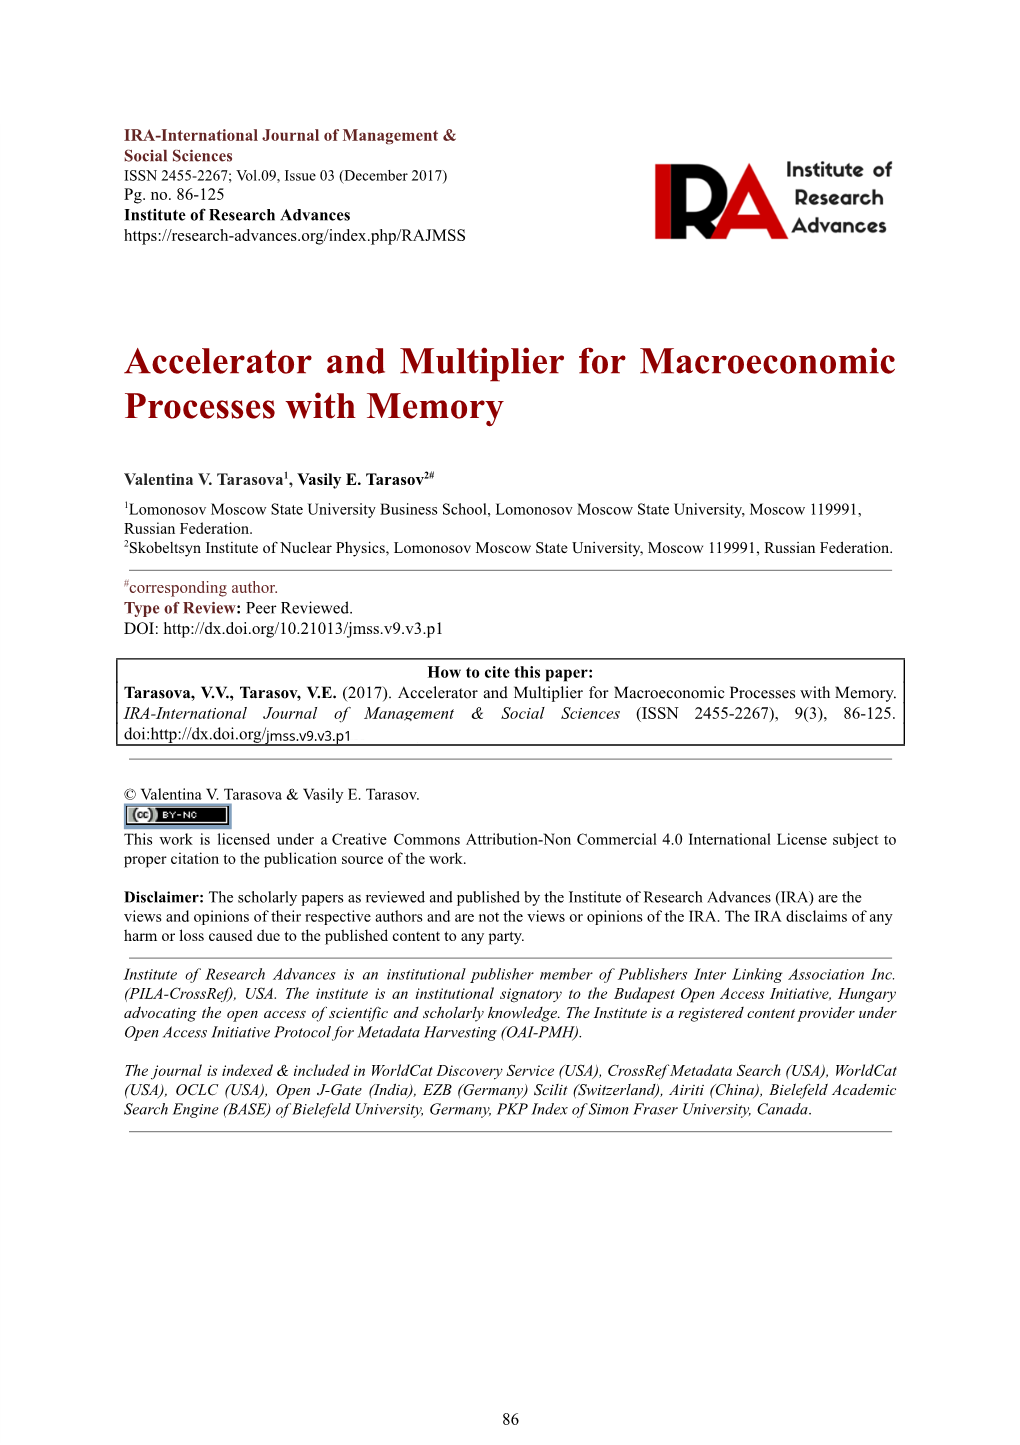 Accelerator and Multiplier for Macroeconomic Processes with Memory